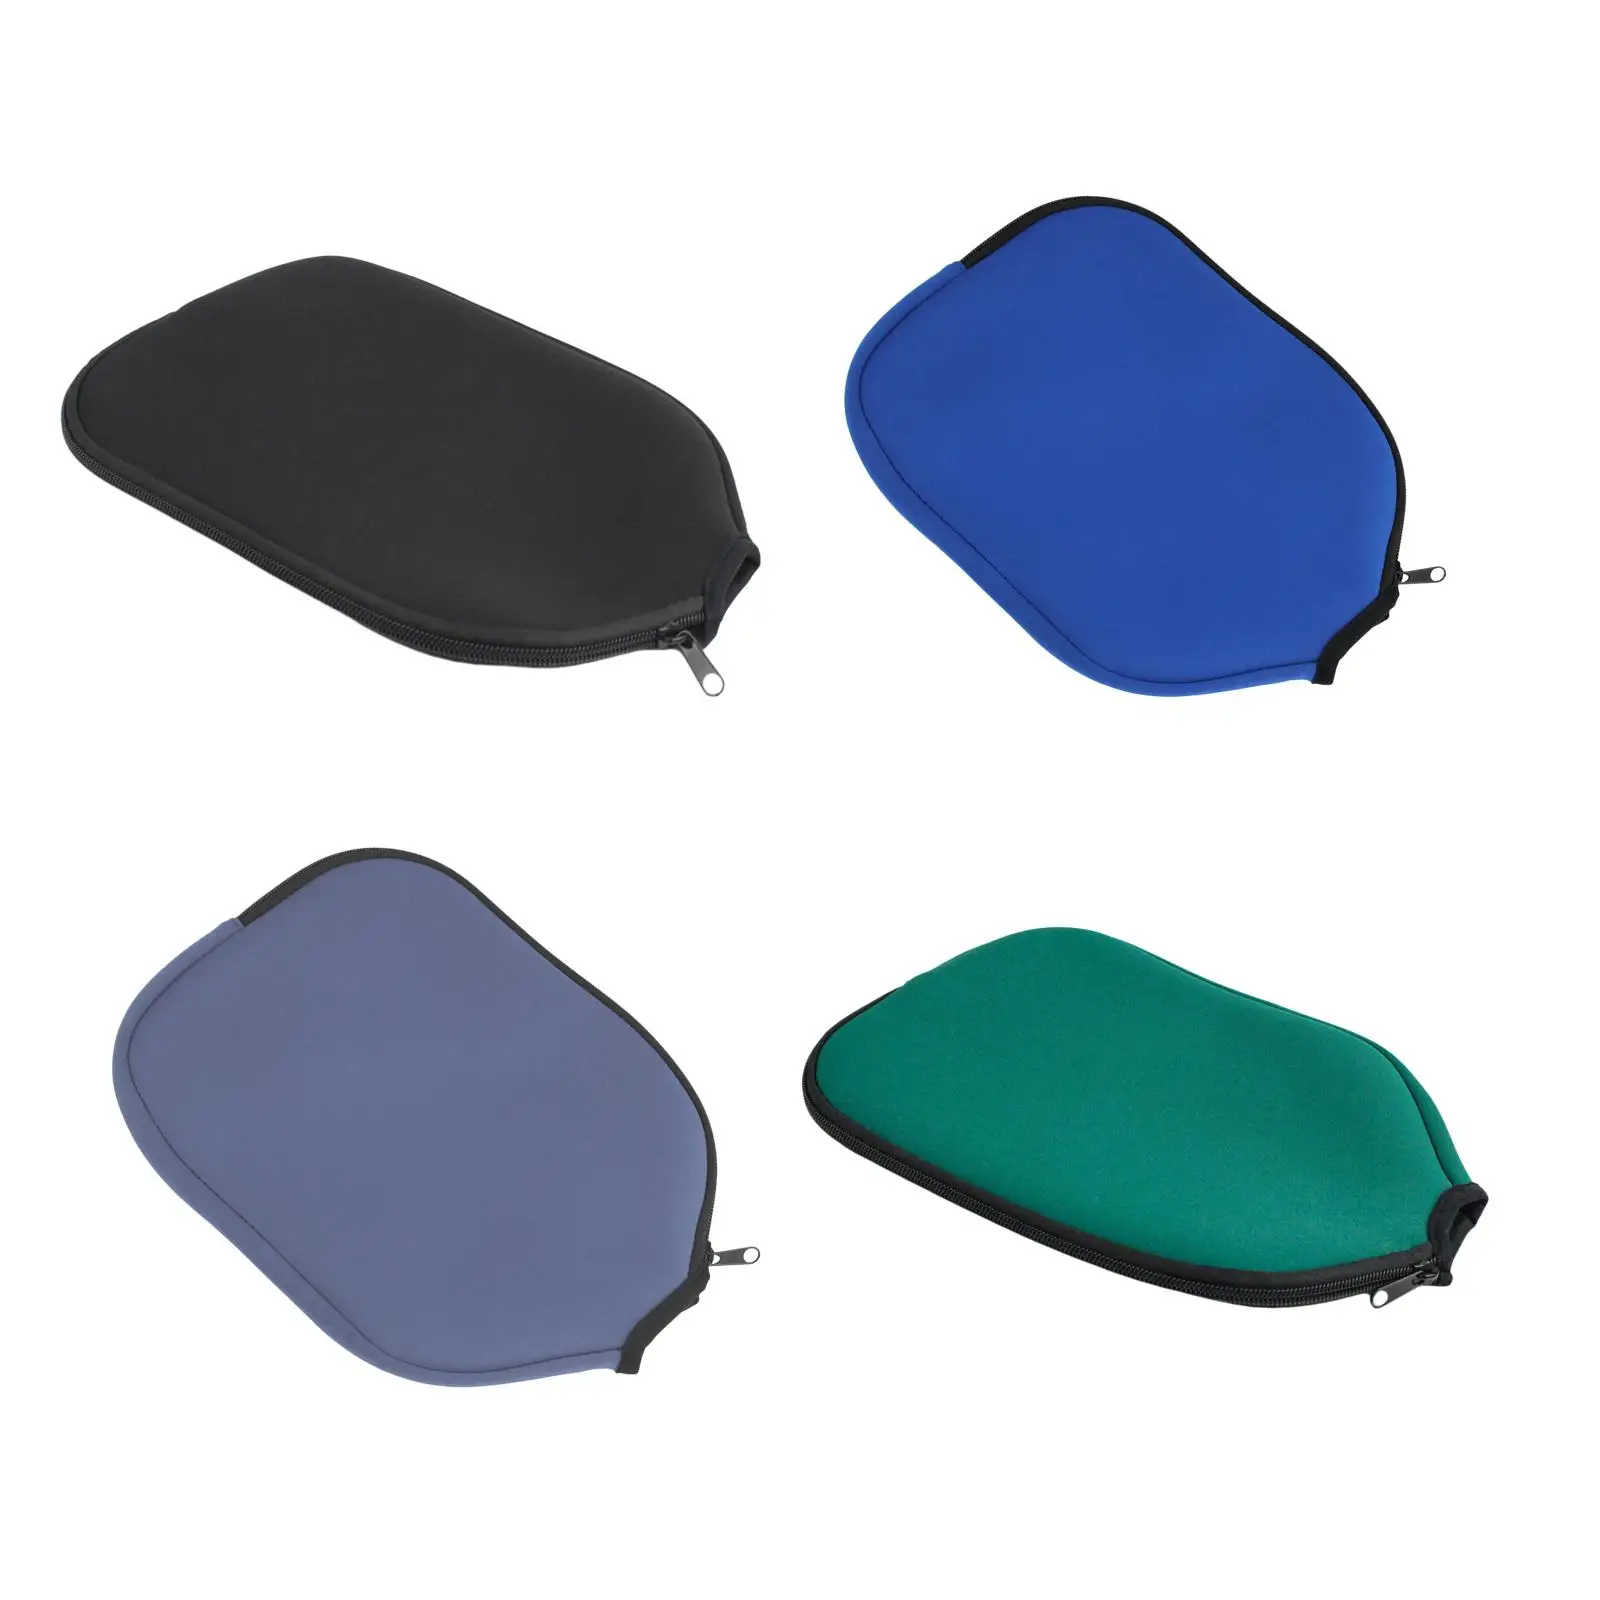 Neoprene Paddle Cover Protective Sleeve Premium Dustproof Accessories Protective Pickleball Protection Racket Sleeve Durable